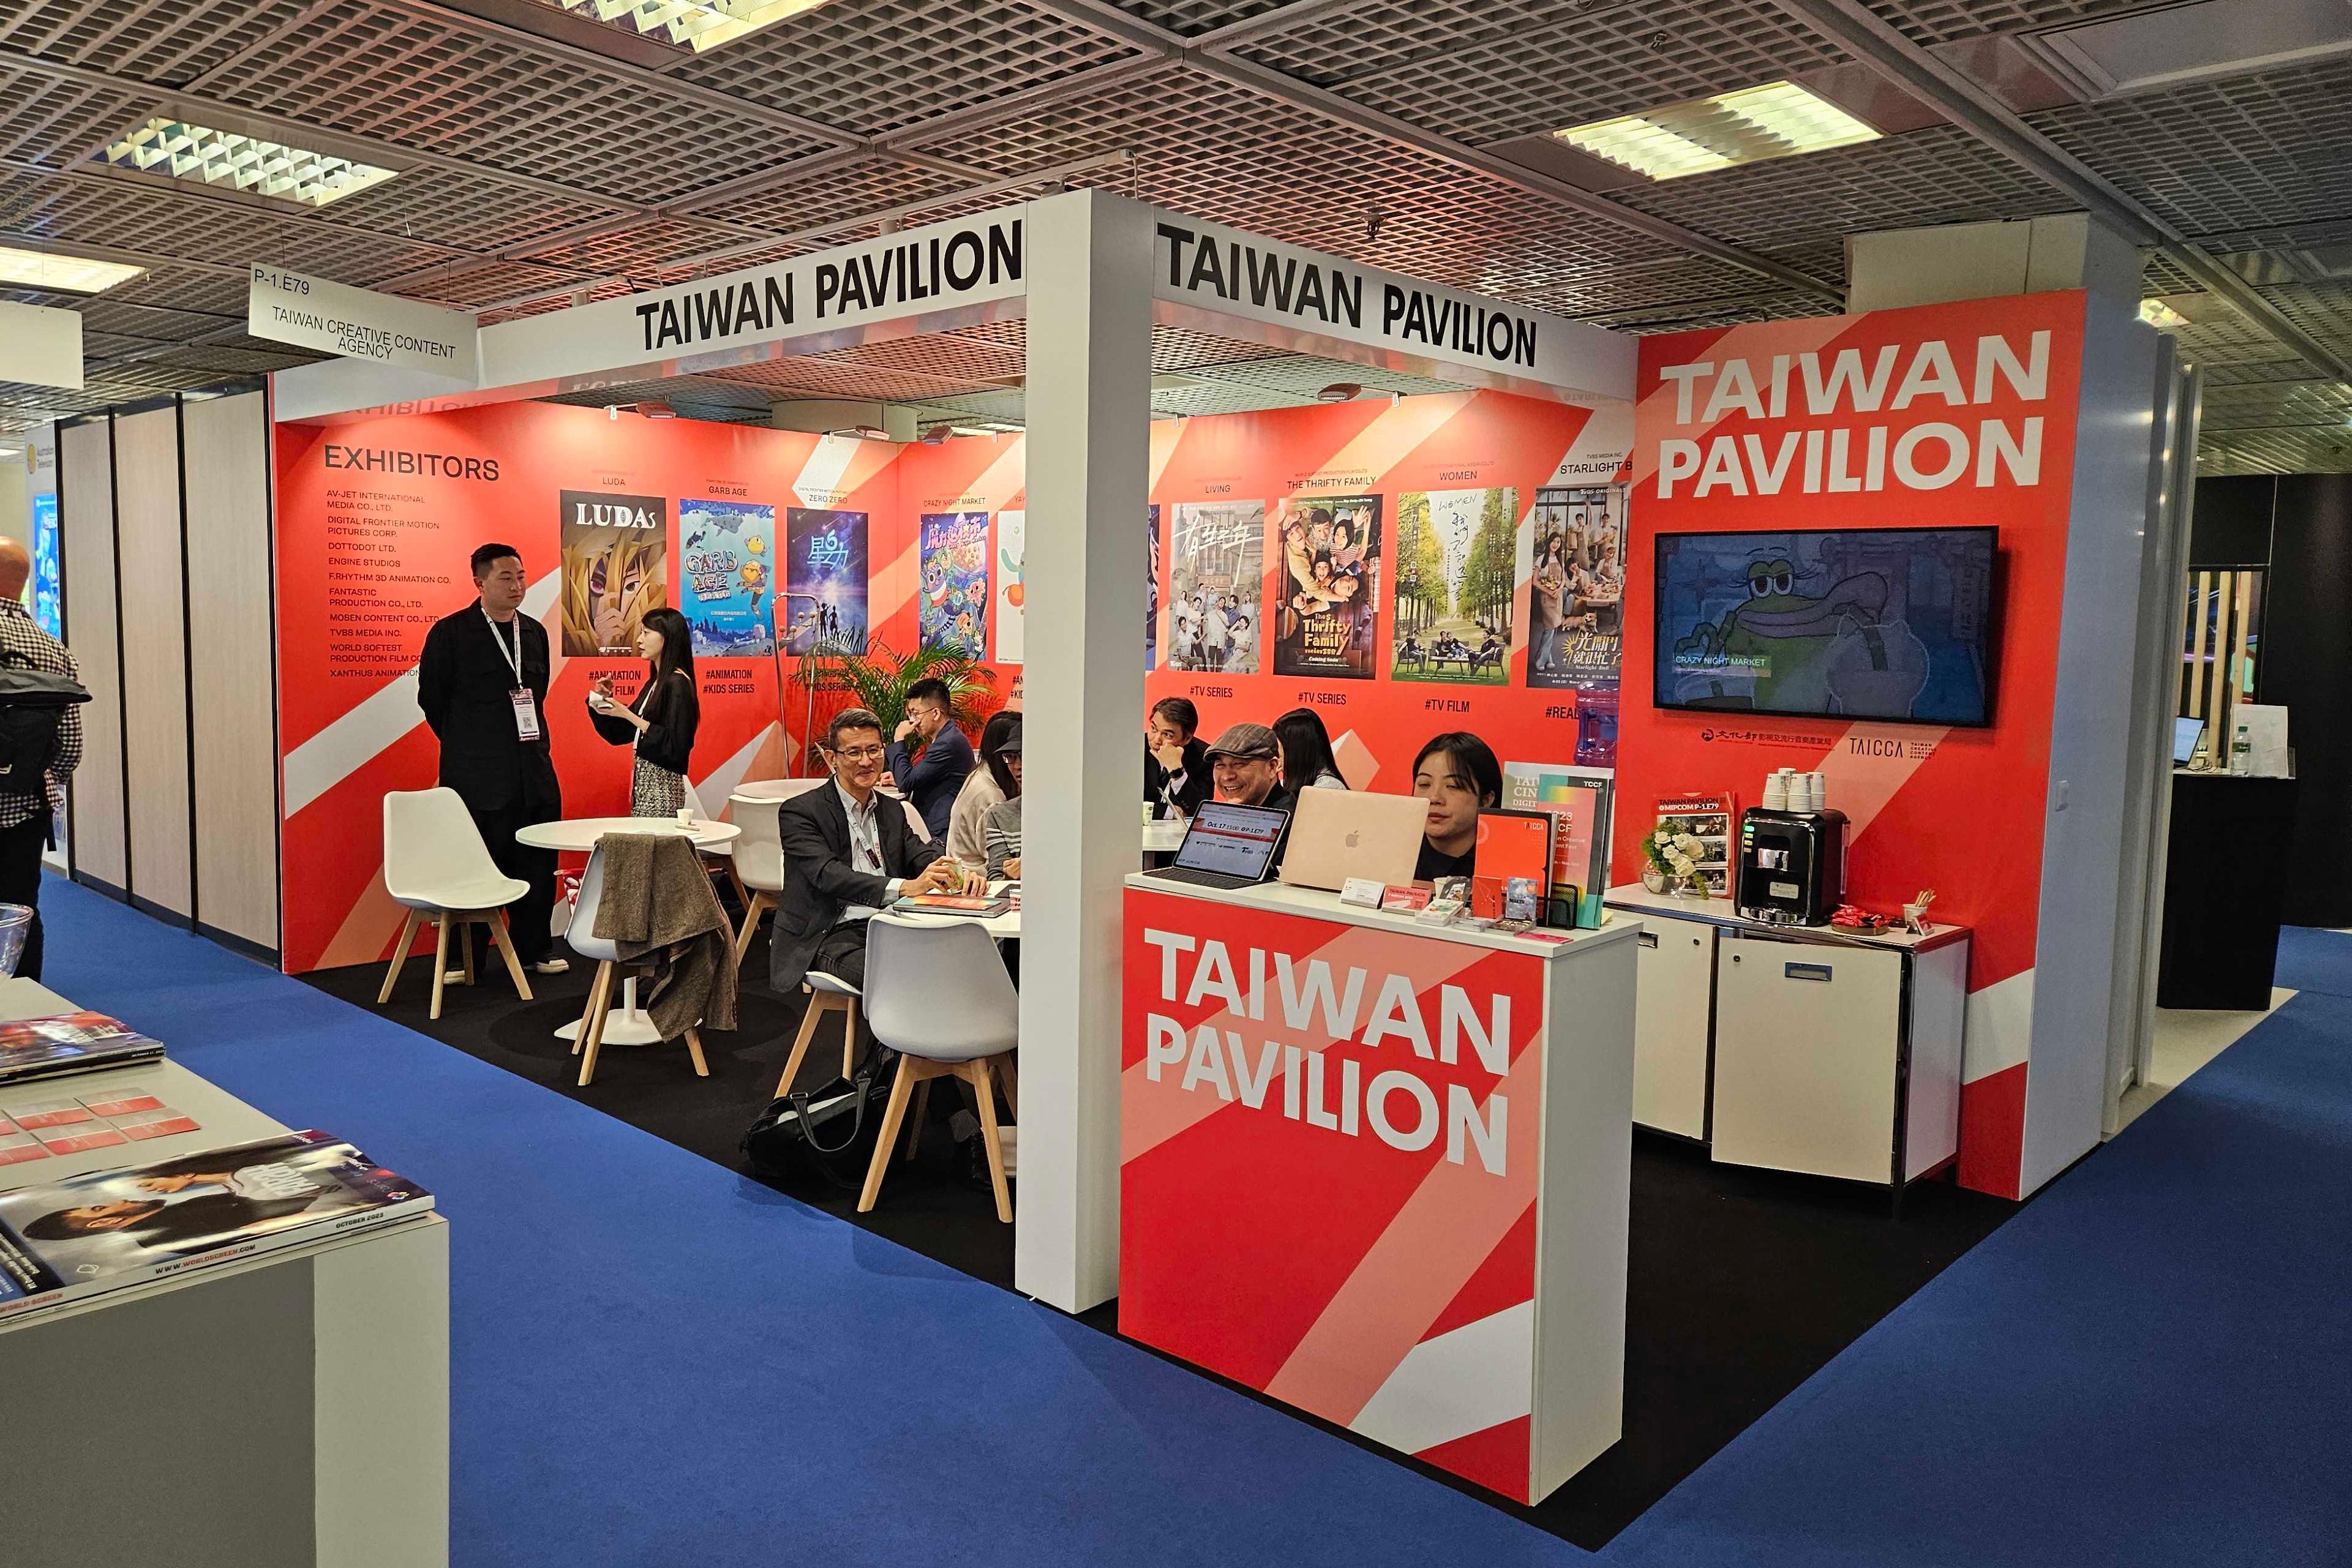 TAICCA presents Taiwan Pavilion at MIPCOM to foster international sales of Taiwan TV content 